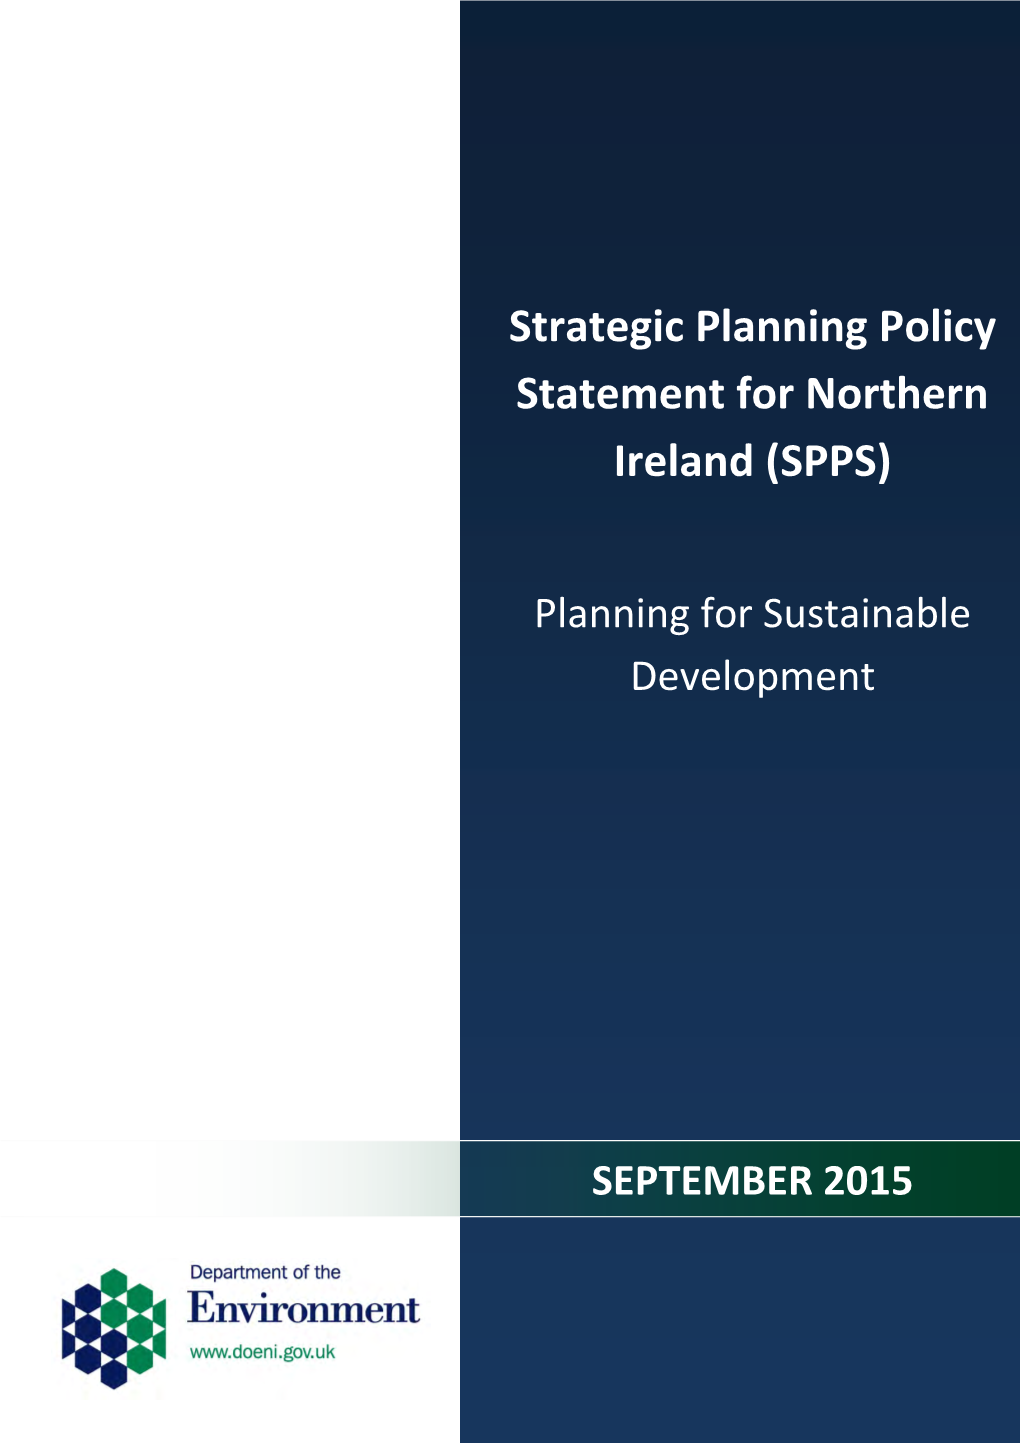 A Strategic Planning Policy Statement for Northern Ireland (SPPS